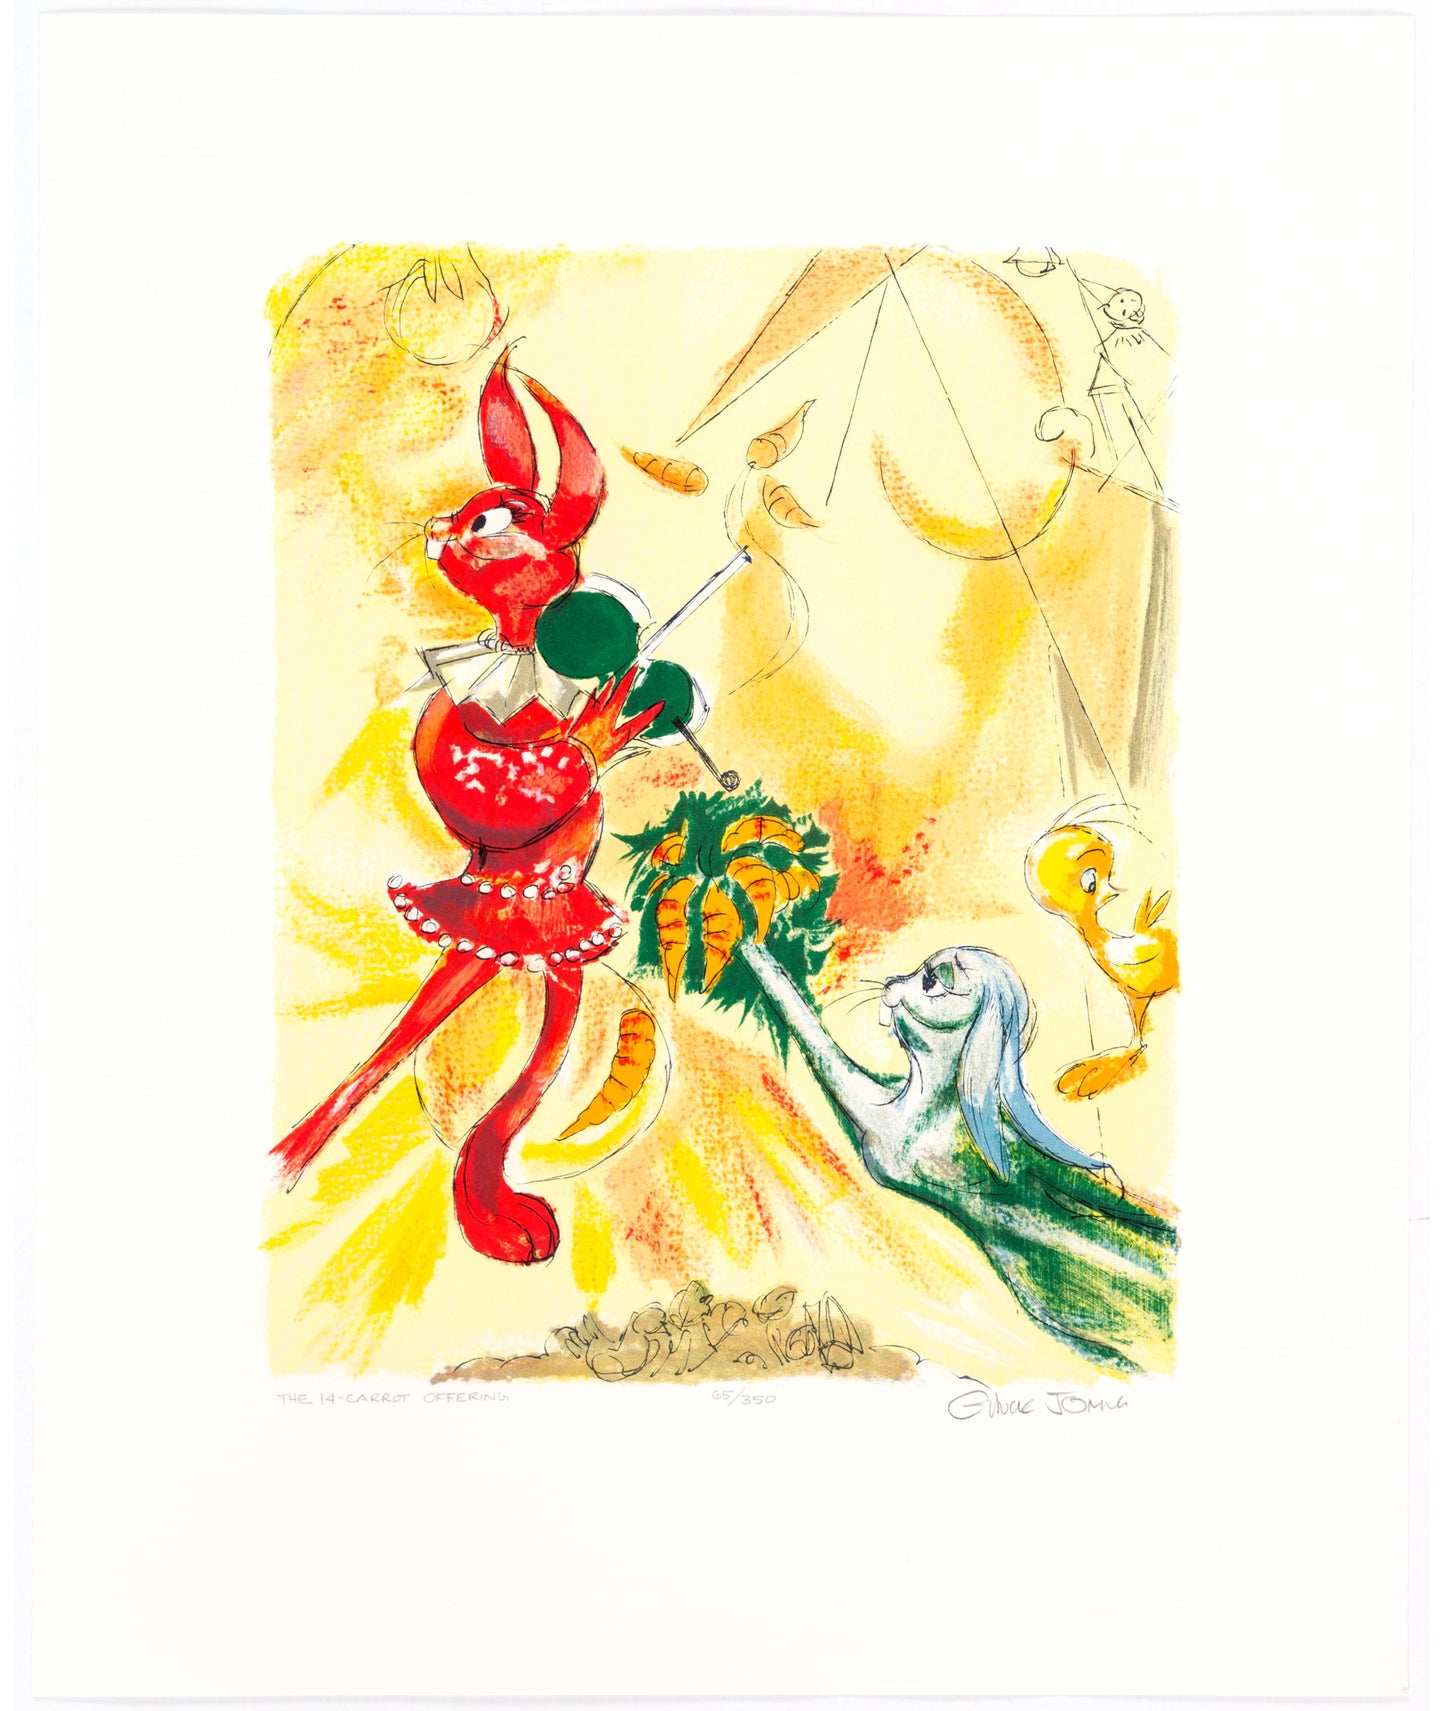 Chuck Jones Signed 14-Carrot Offering Bugs Bunny and Tweety 1990 Warner Brothers Limited Edition Lithograph of 350 Chagall OH